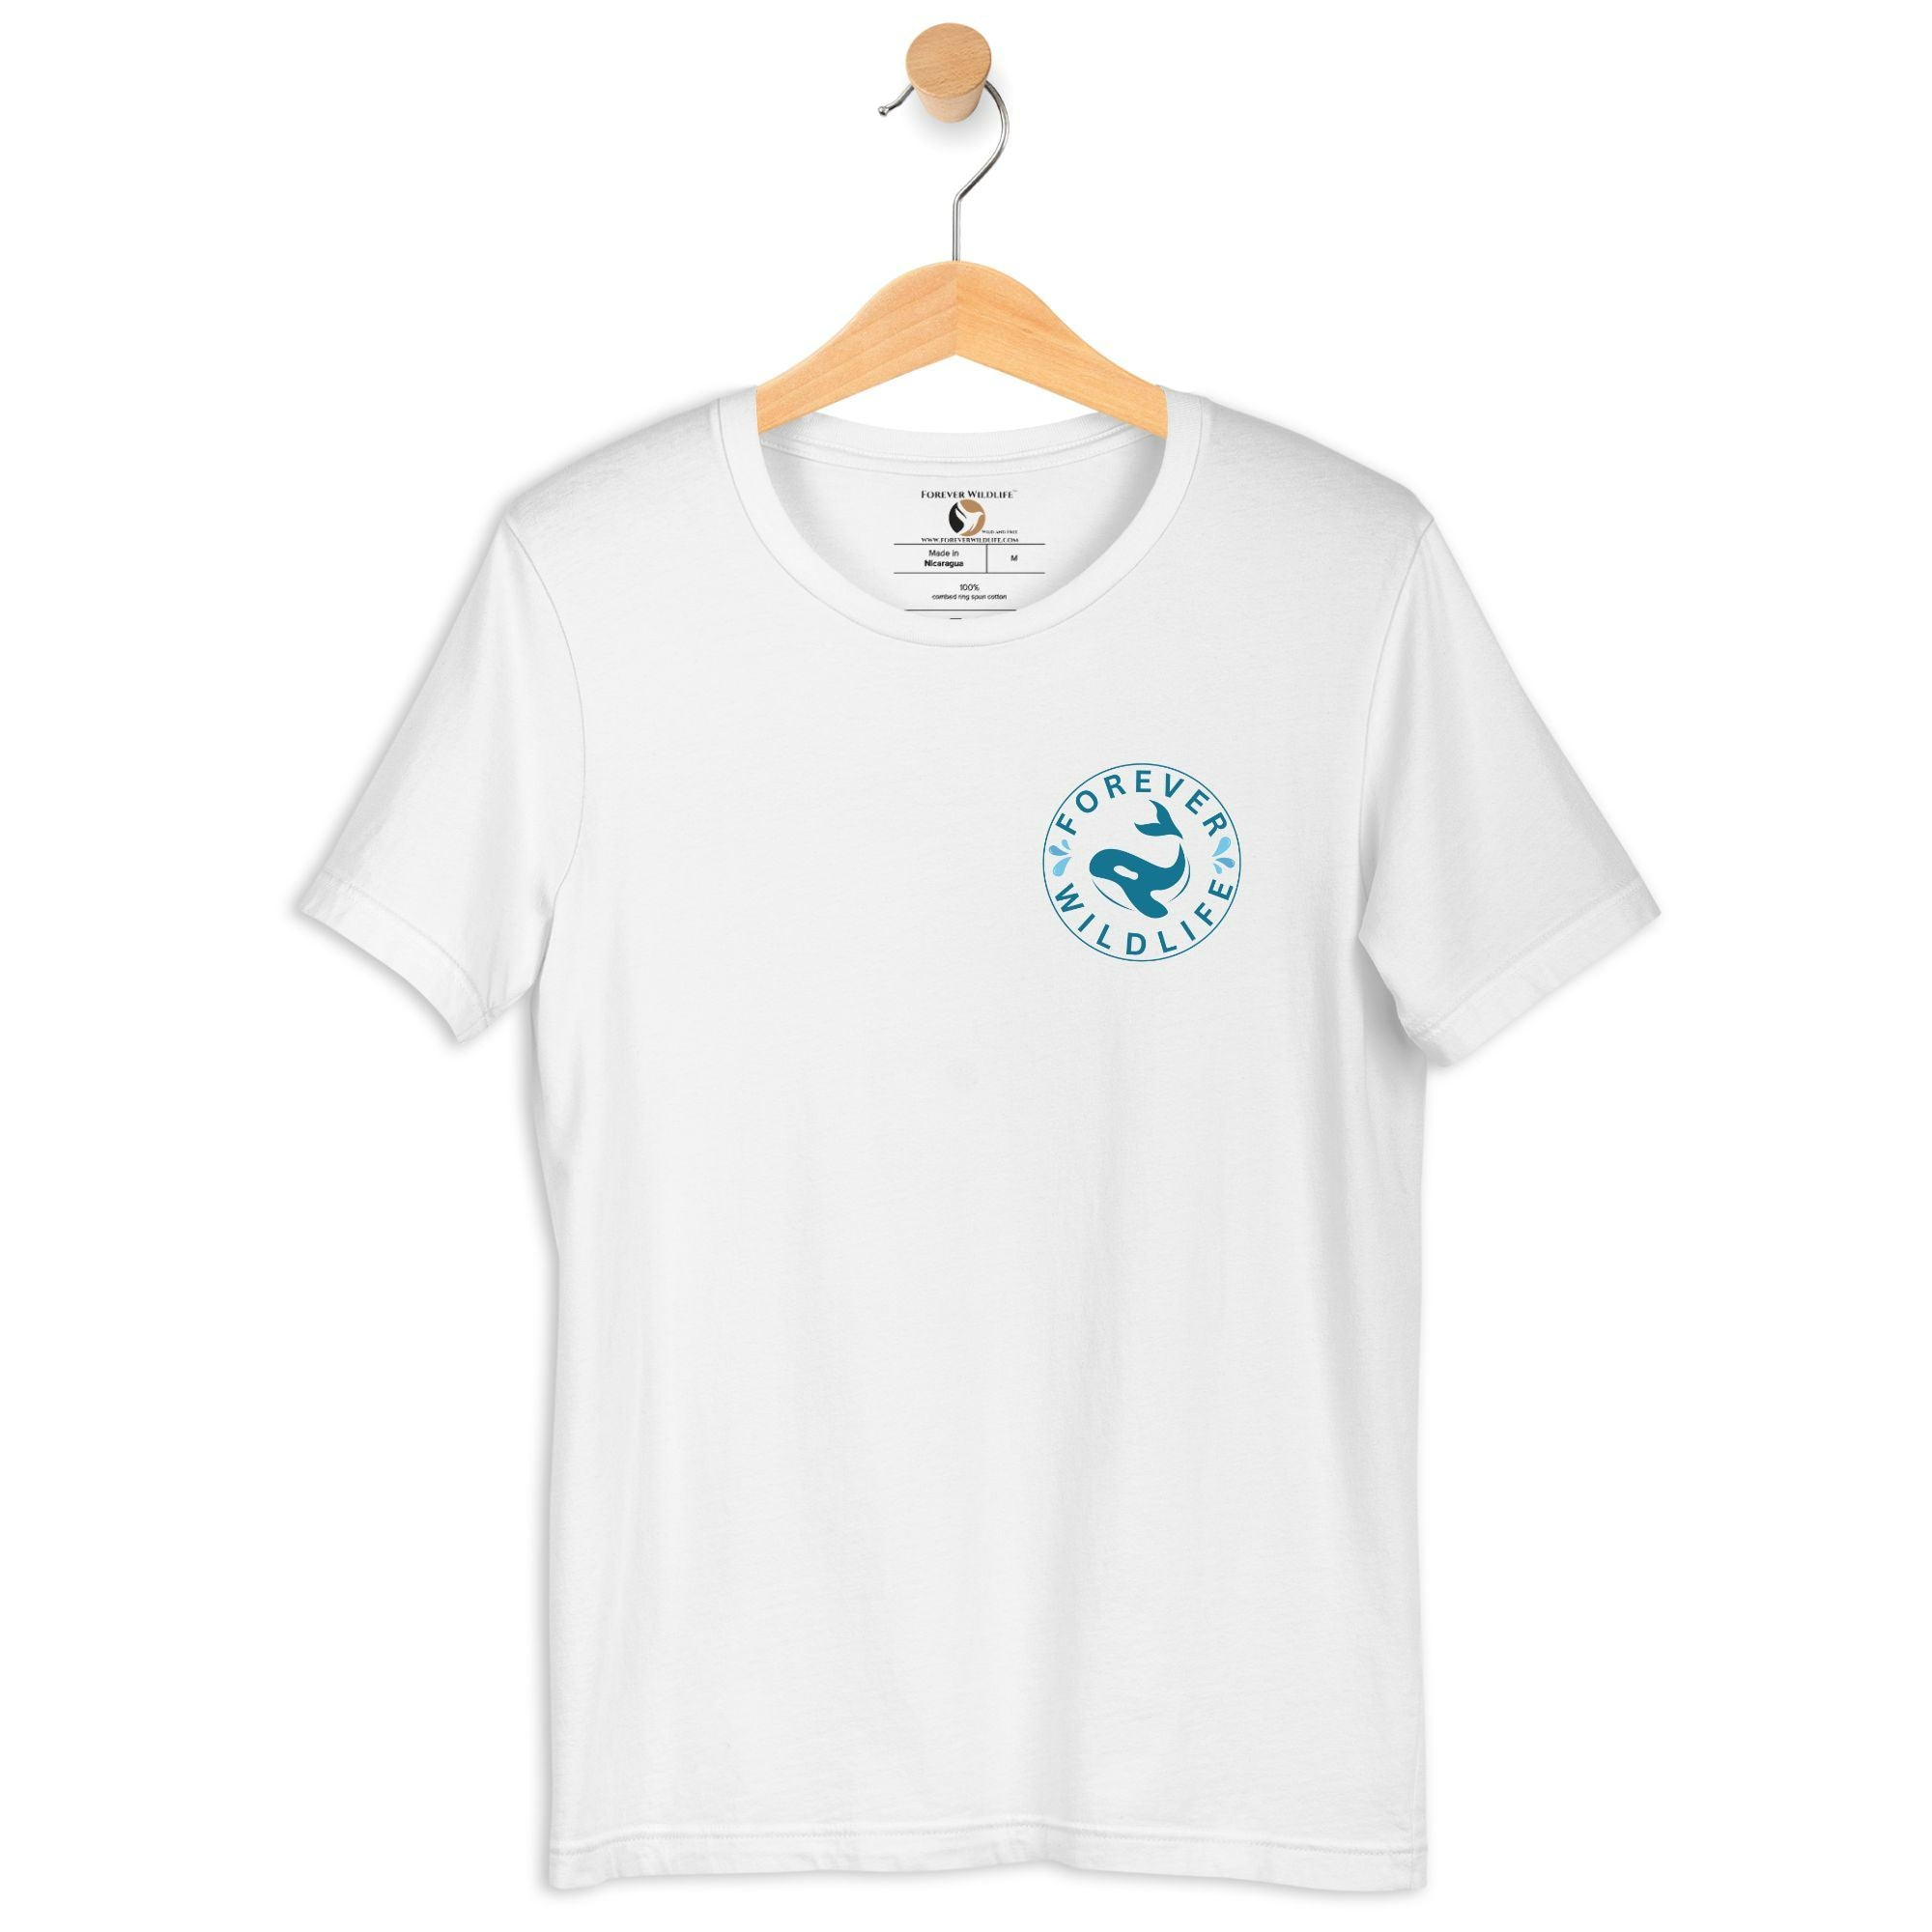 Orca Shirt, beautiful White T-Shirt with Killer Whales on the shirt by Forever Wildlife selling Wildlife T Shirts. 7.	